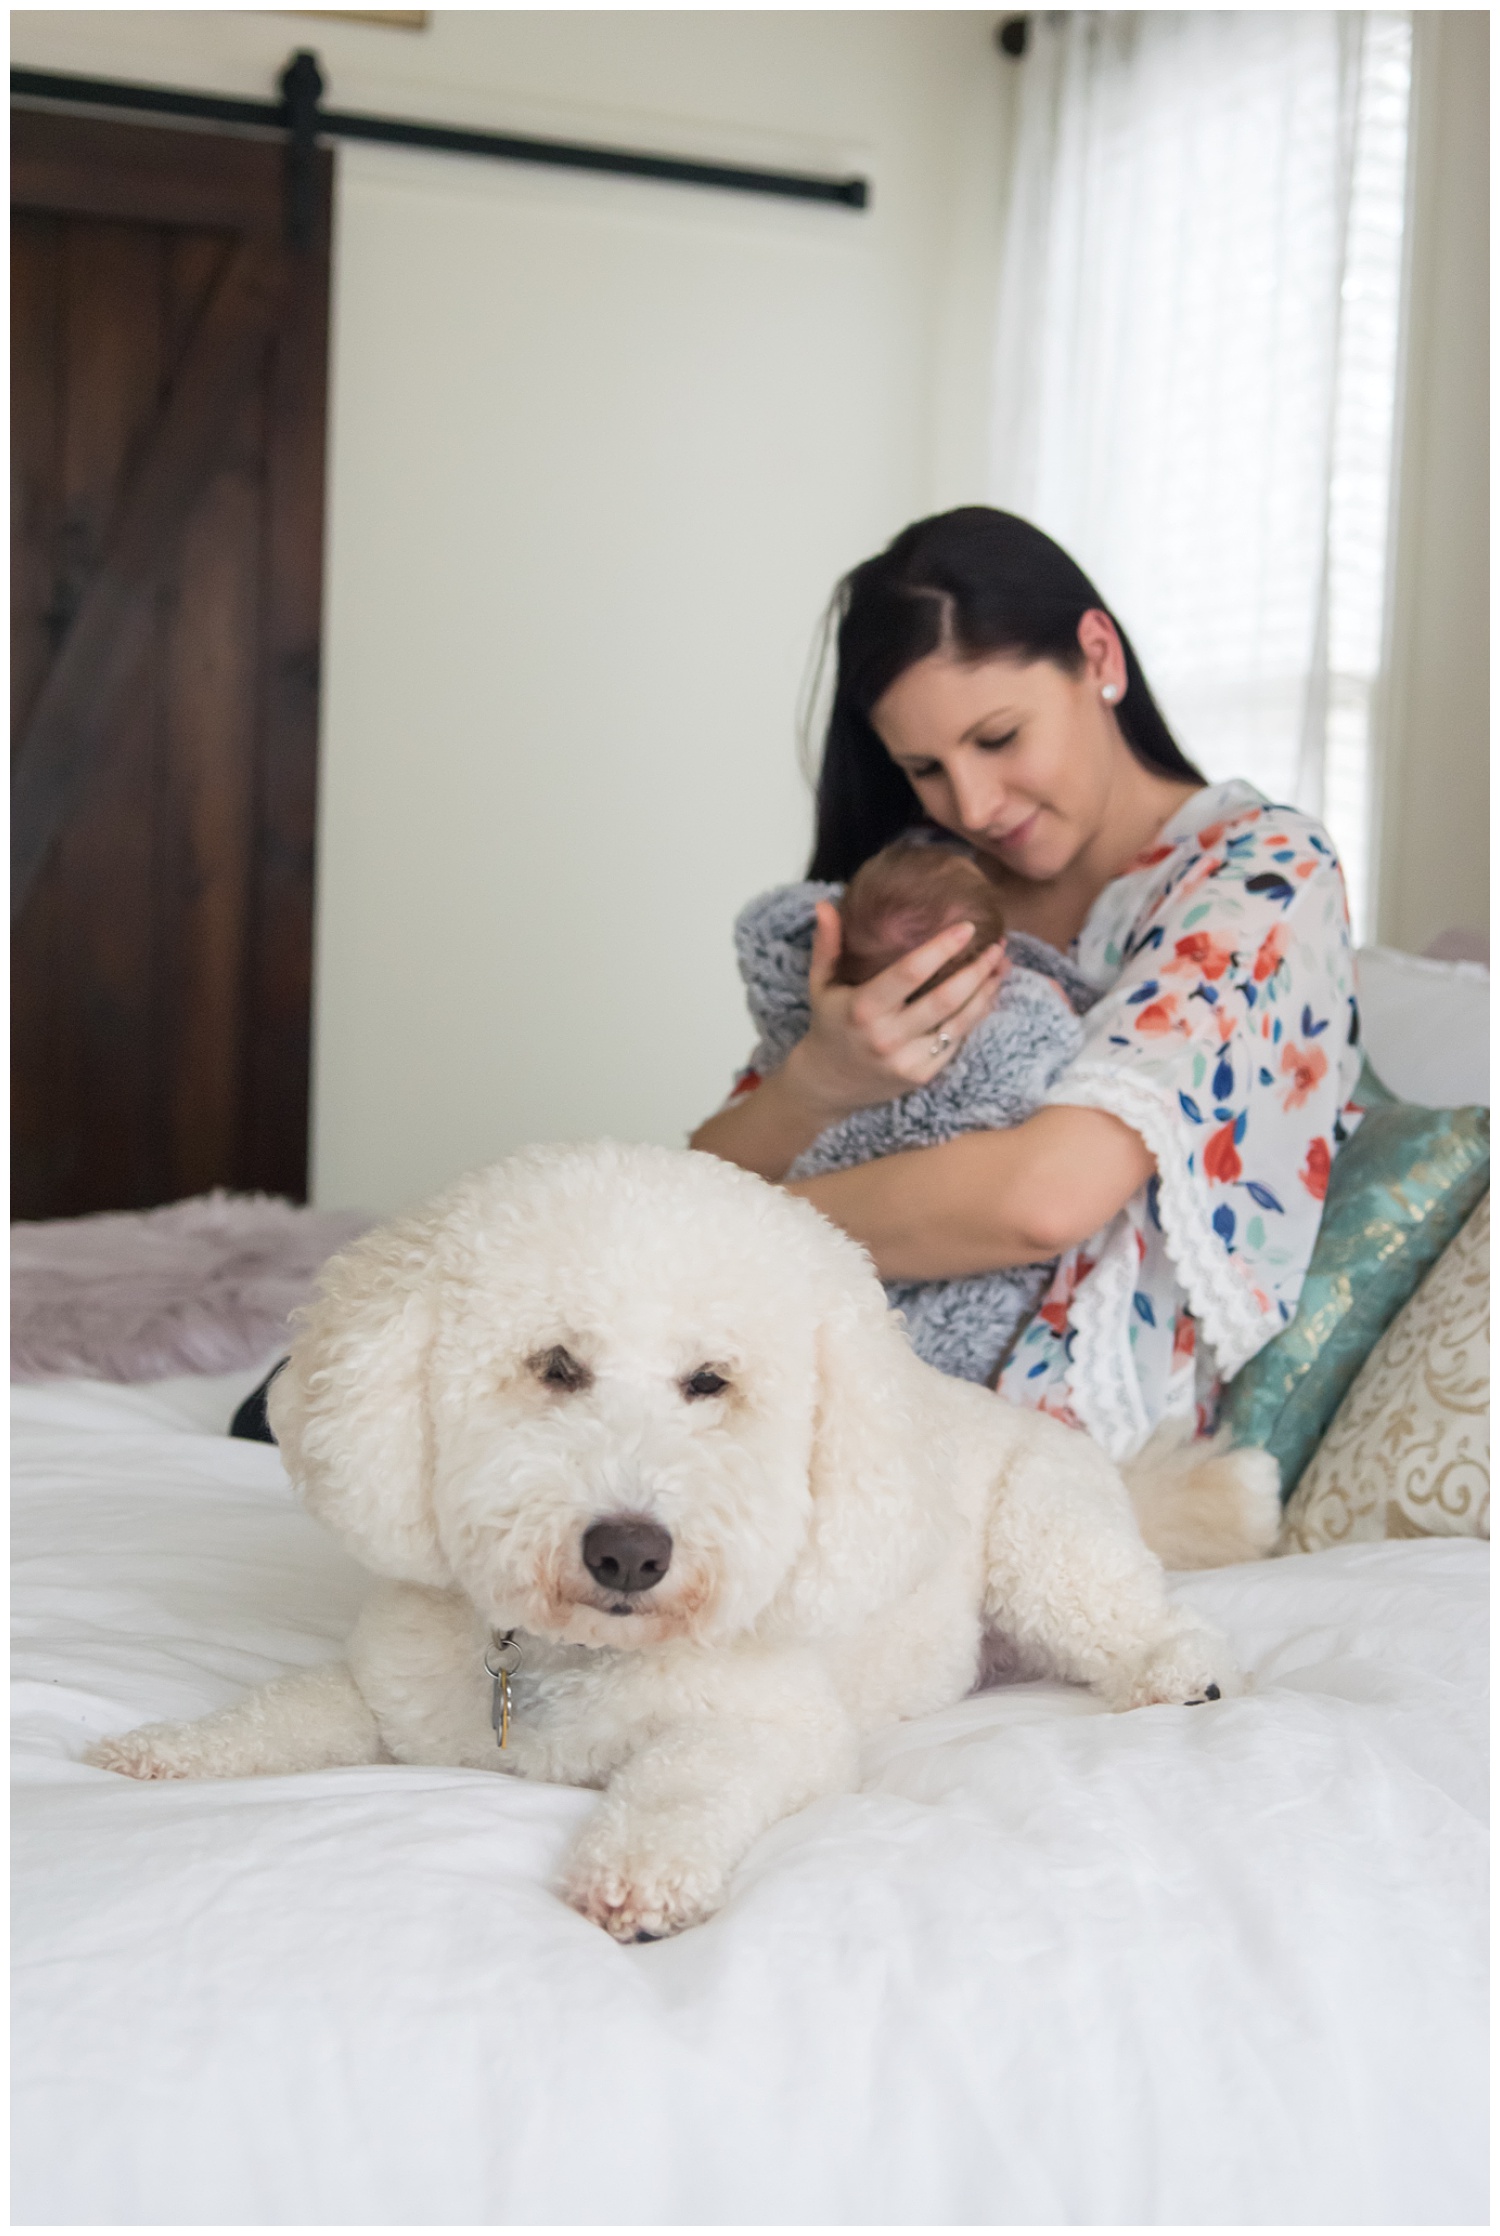 these images were taken in atlanta, georgia during an in home lifestyle newborn session. the focus is on the family dog and mom is holding the newborn baby girl in the background of the photo.